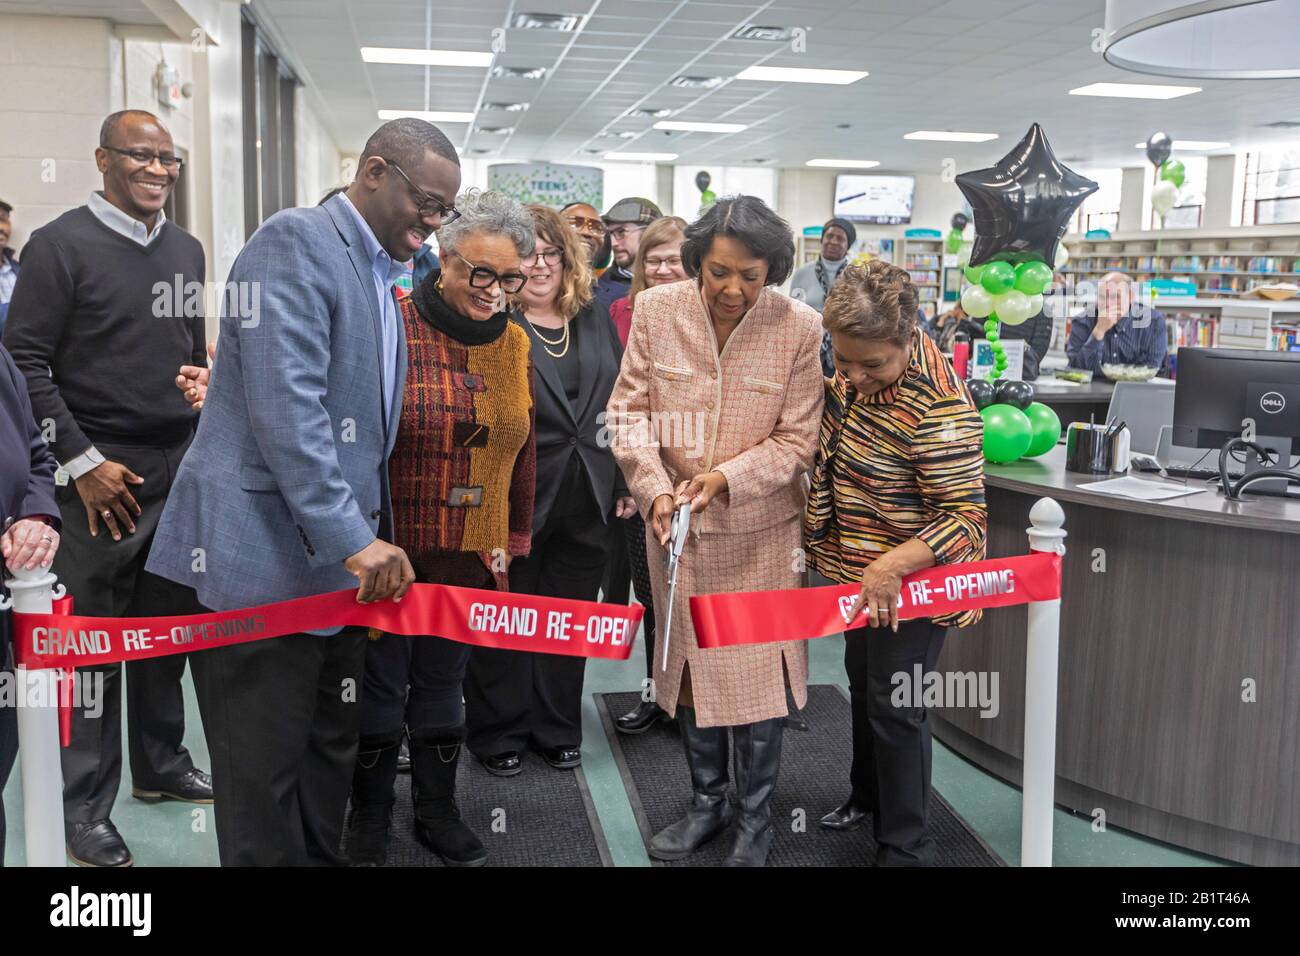 Detroit, Michigan - Library and community leaders cut a ribbon for the Grand Re-Opening of the Jefferson Branch of the Detroit Public Library after it Stock Photo